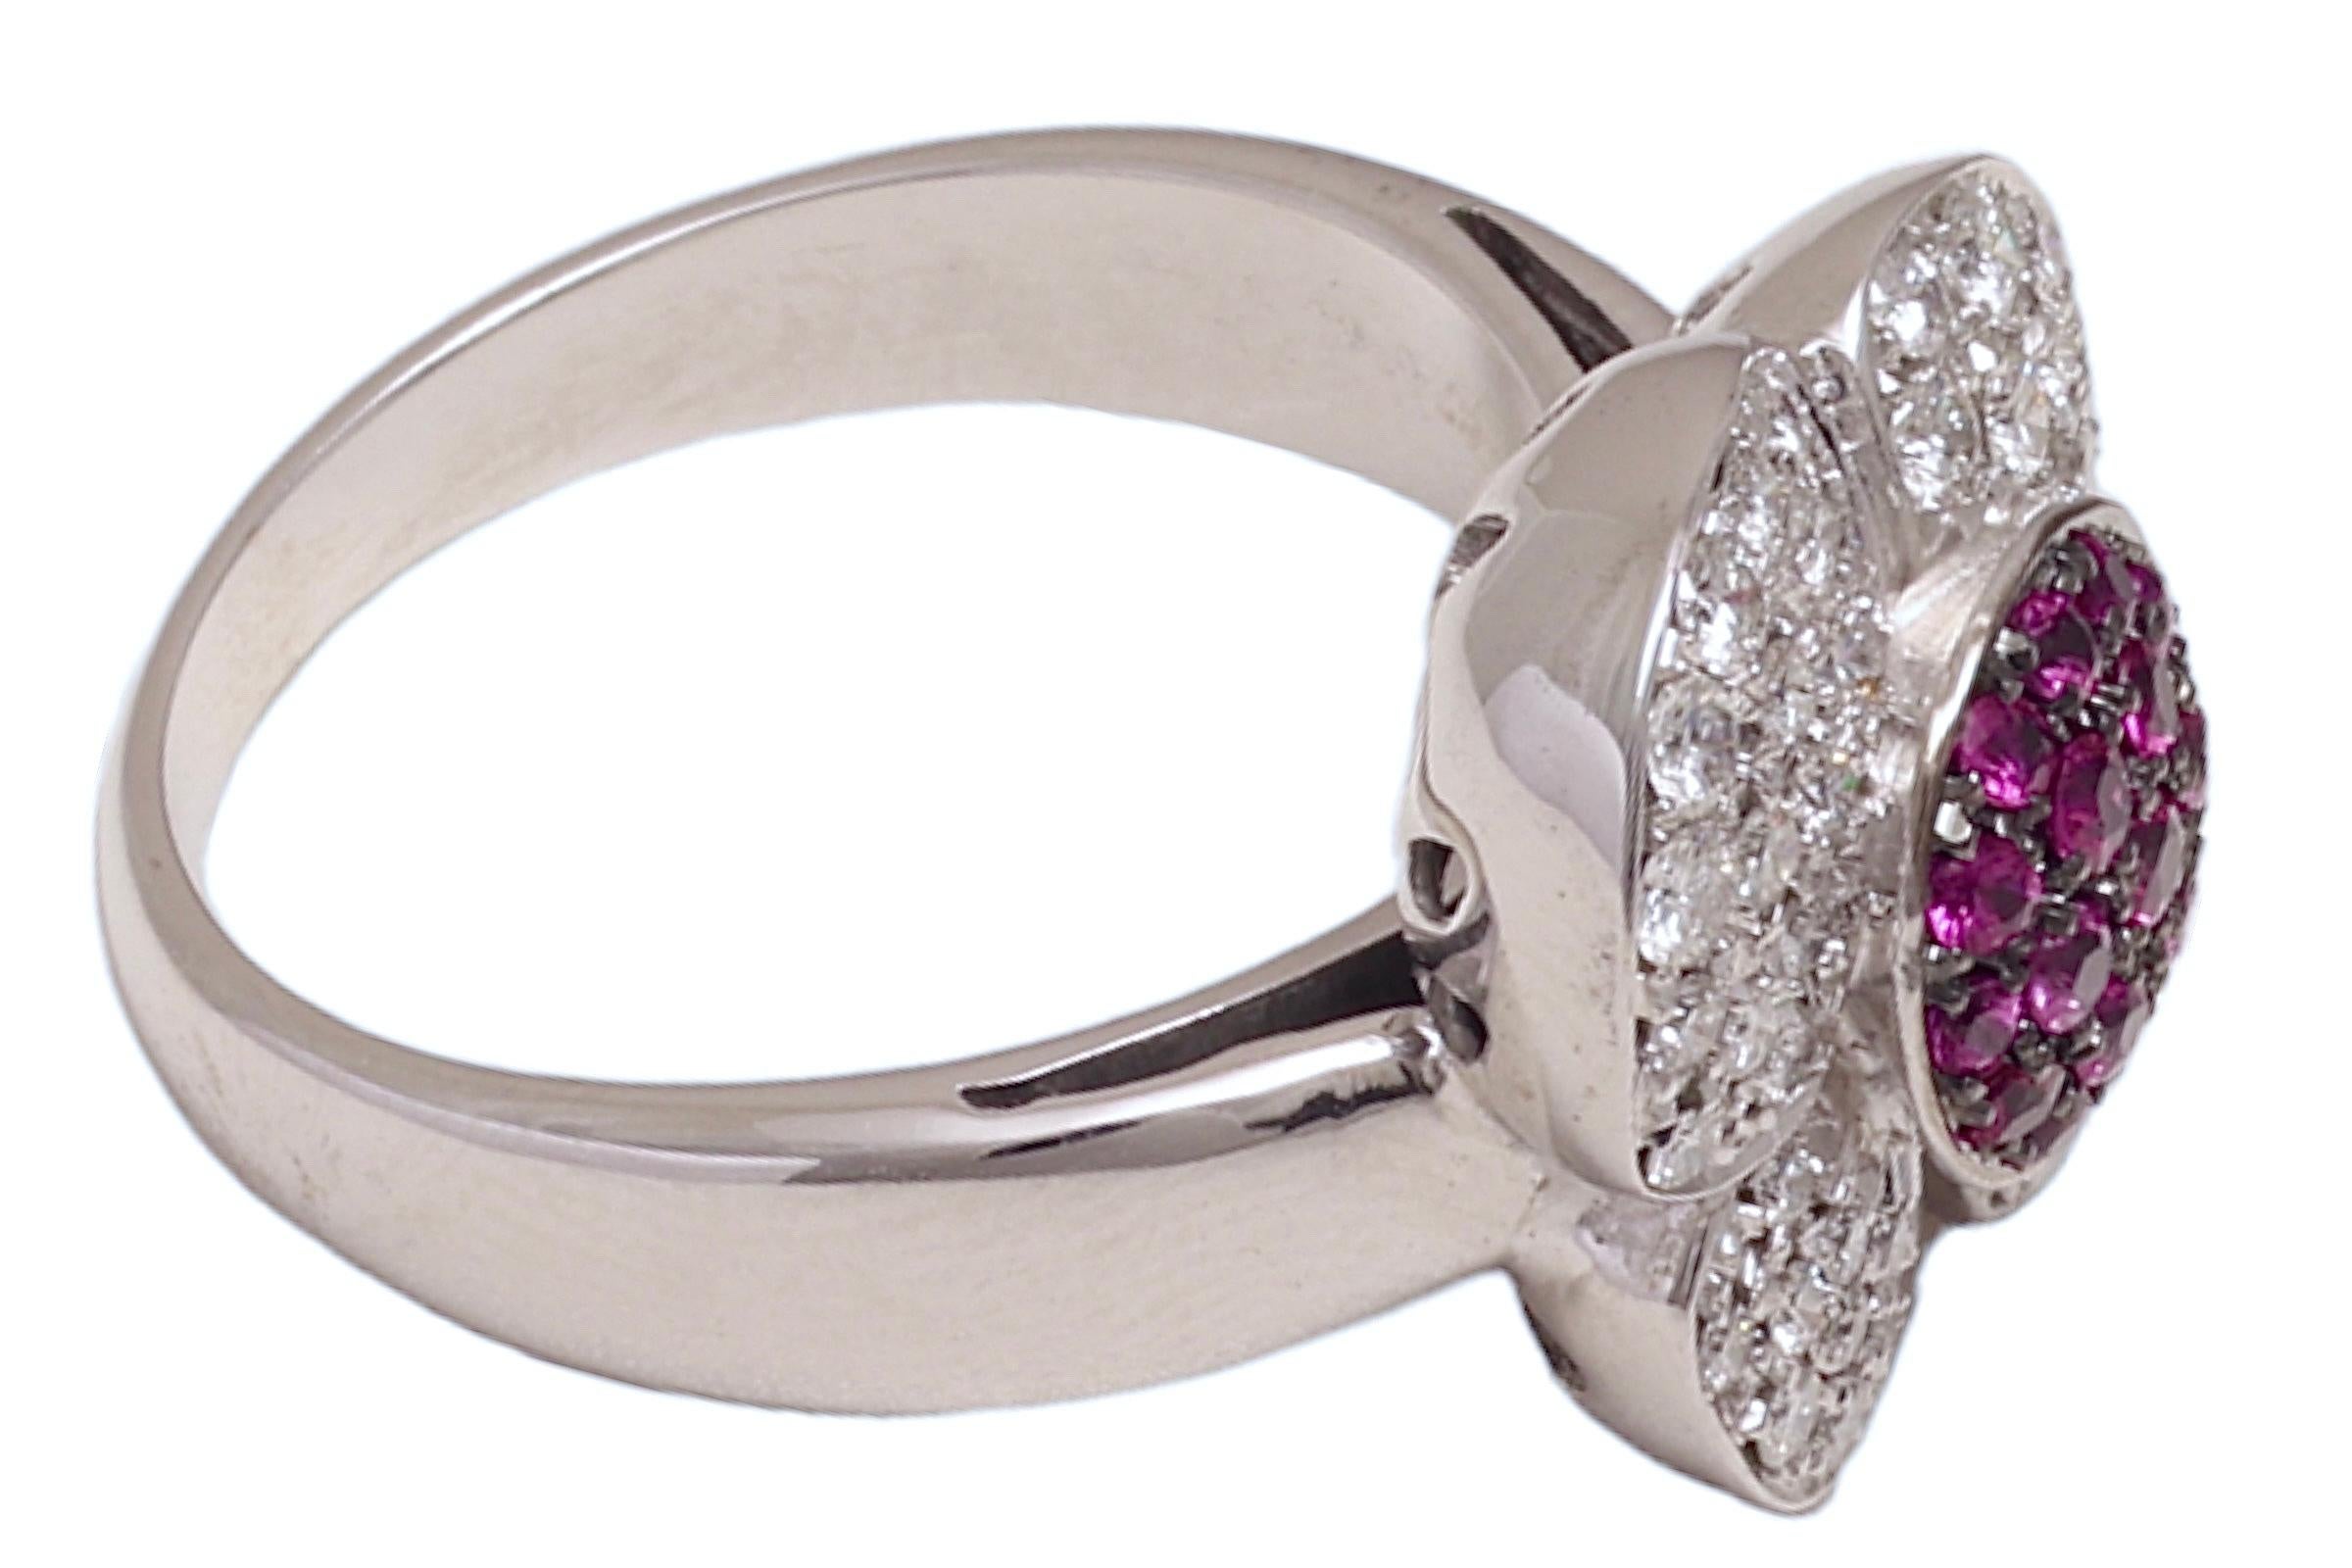  18 kt. White Gold Flower Shape Ring with 1 ct. Diamonds & 0.5 ct. Pink Sapphire In New Condition For Sale In Antwerp, BE